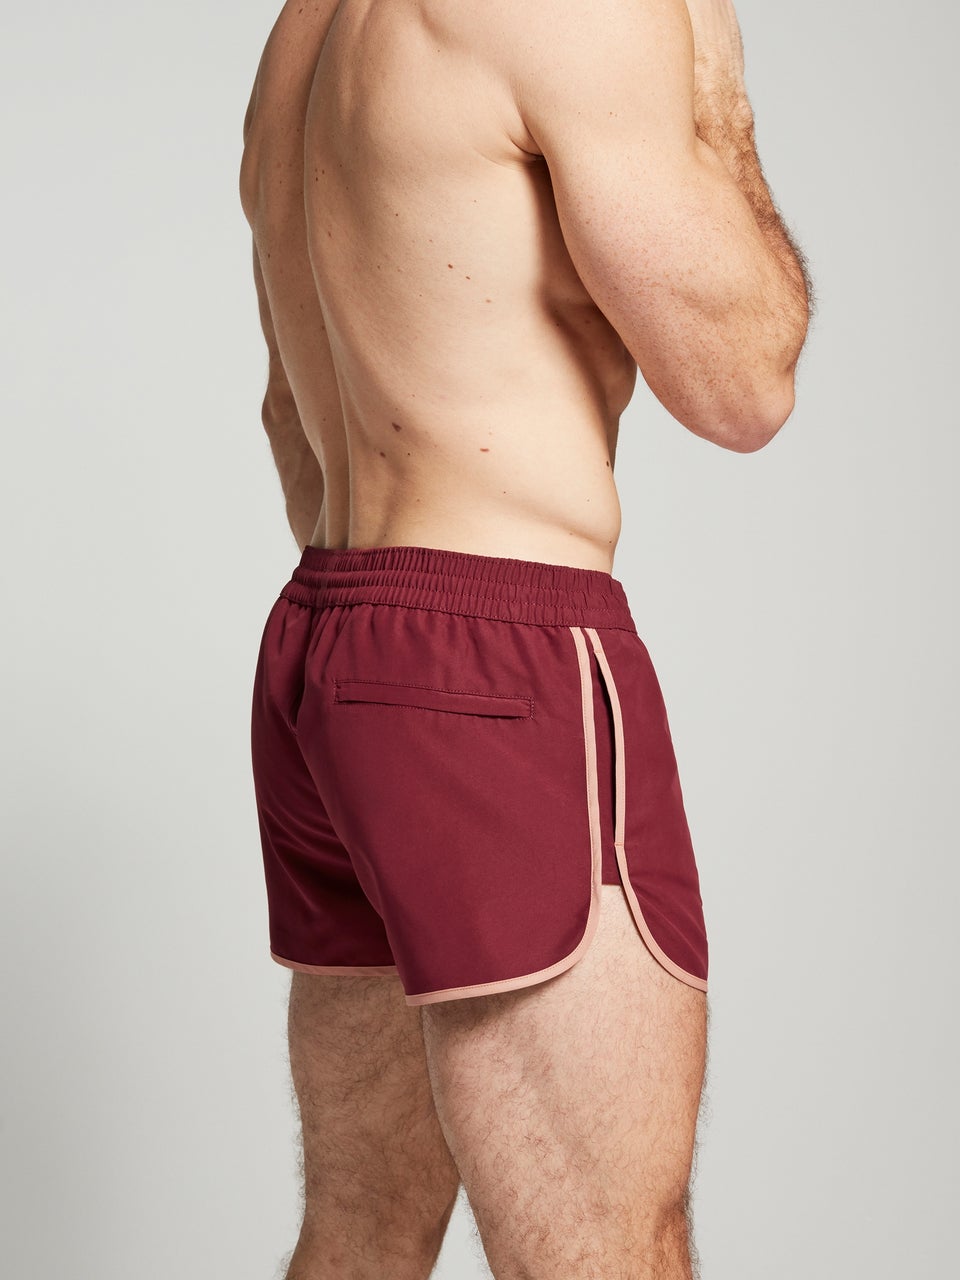 'The Cameo' Shorts Burgundy